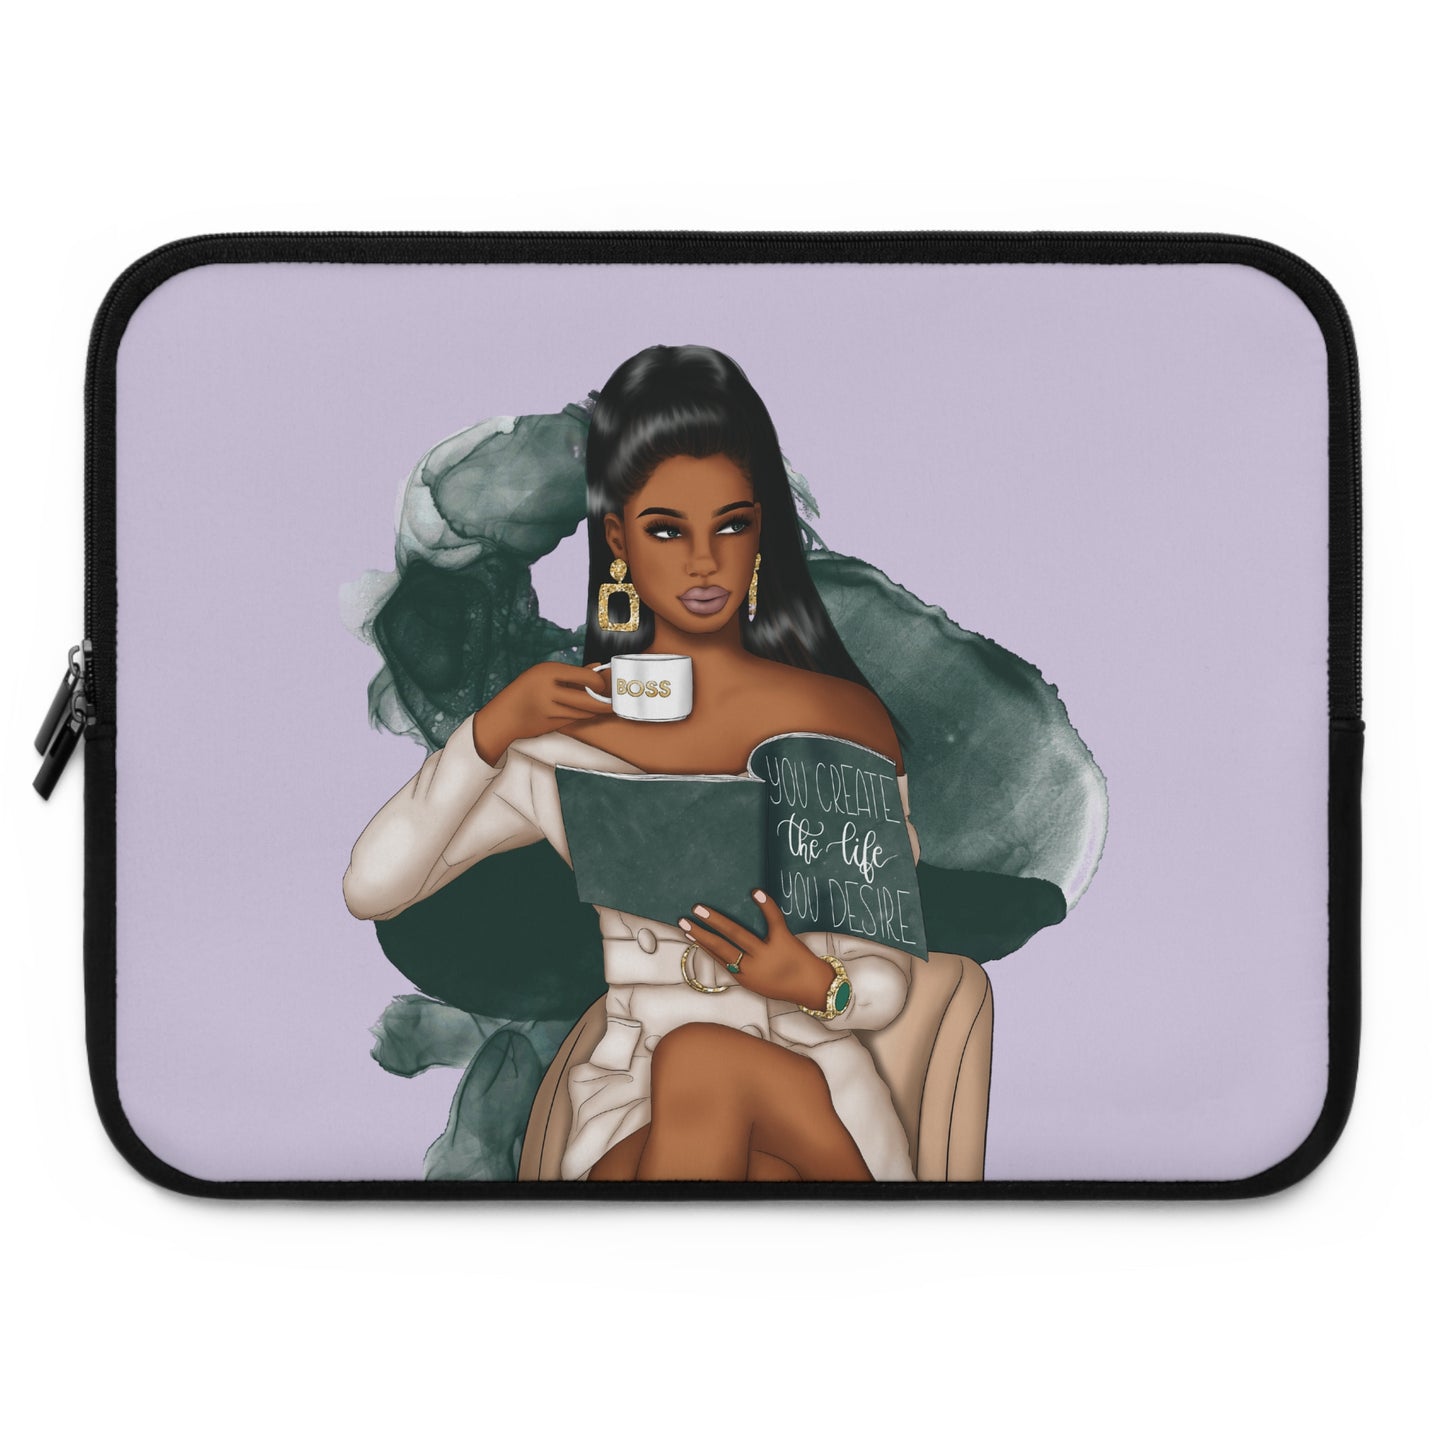 You Create the Life You Desire Laptop Cover (Light Purple)